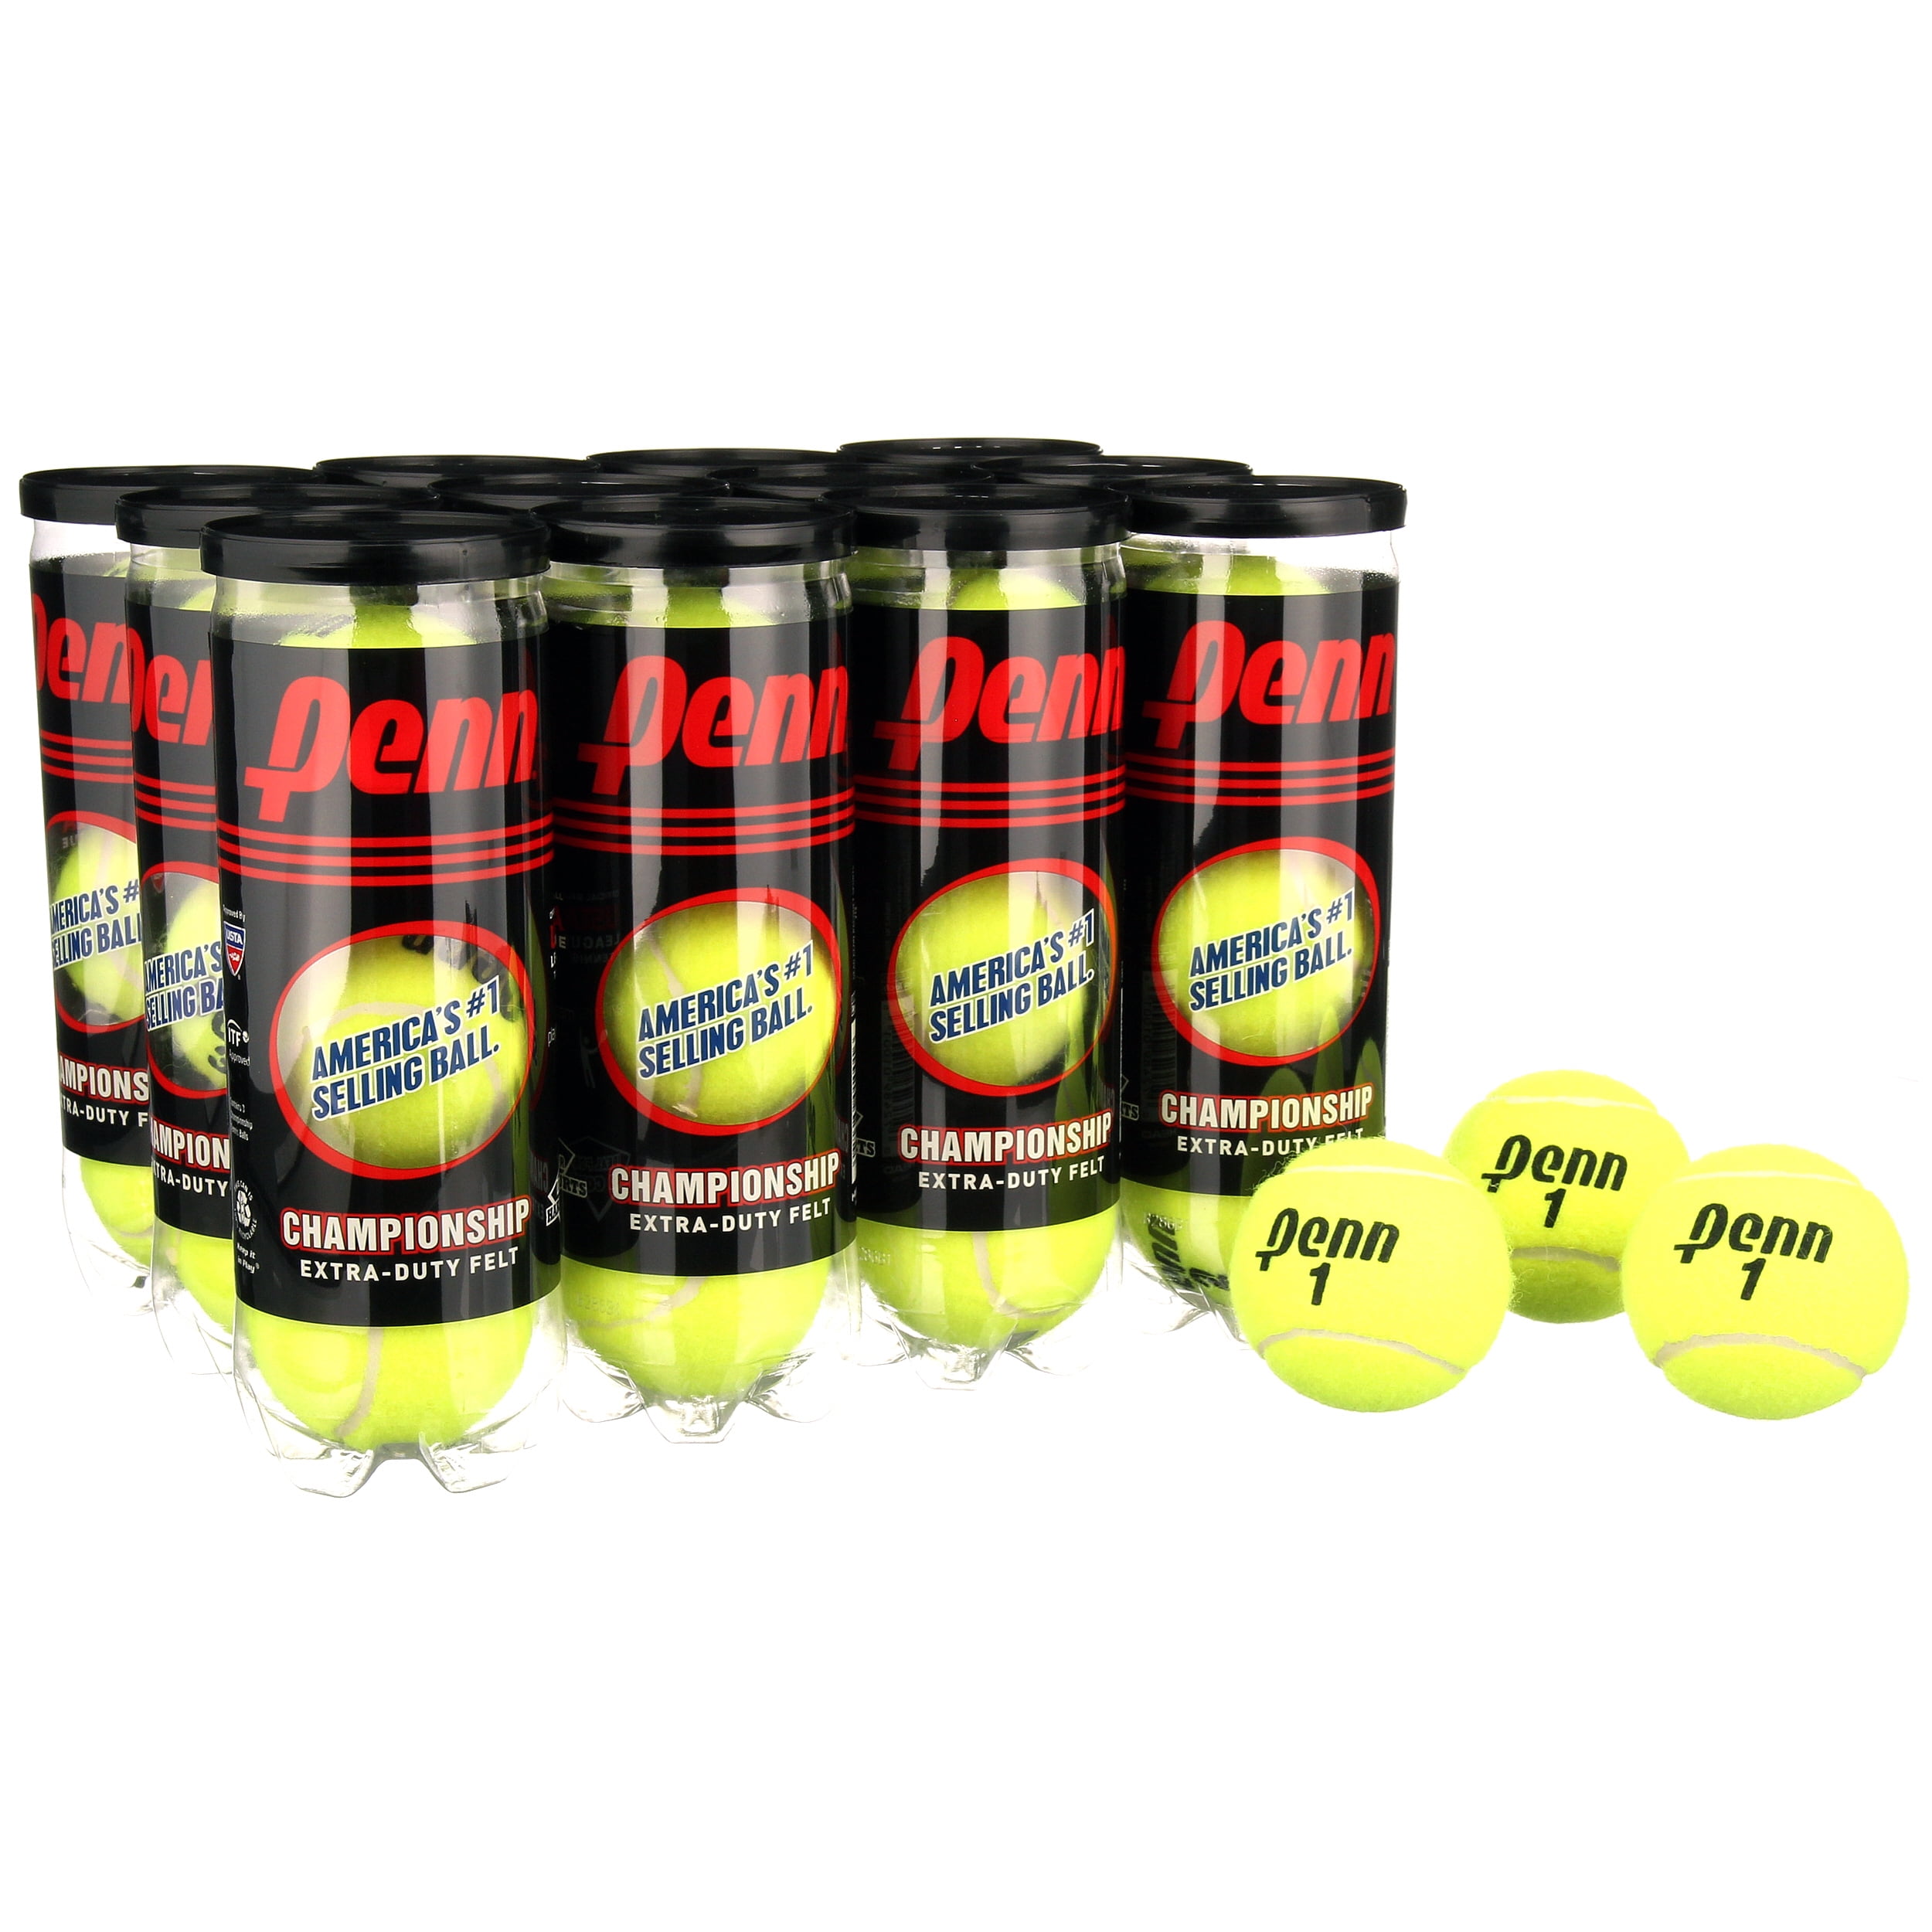 Natural Rubber for consistent Play Official Ball of The United States Tennis Association Leagues Yellow Penn High Altitude Tennis Balls Championship USTA & ITF Approved 